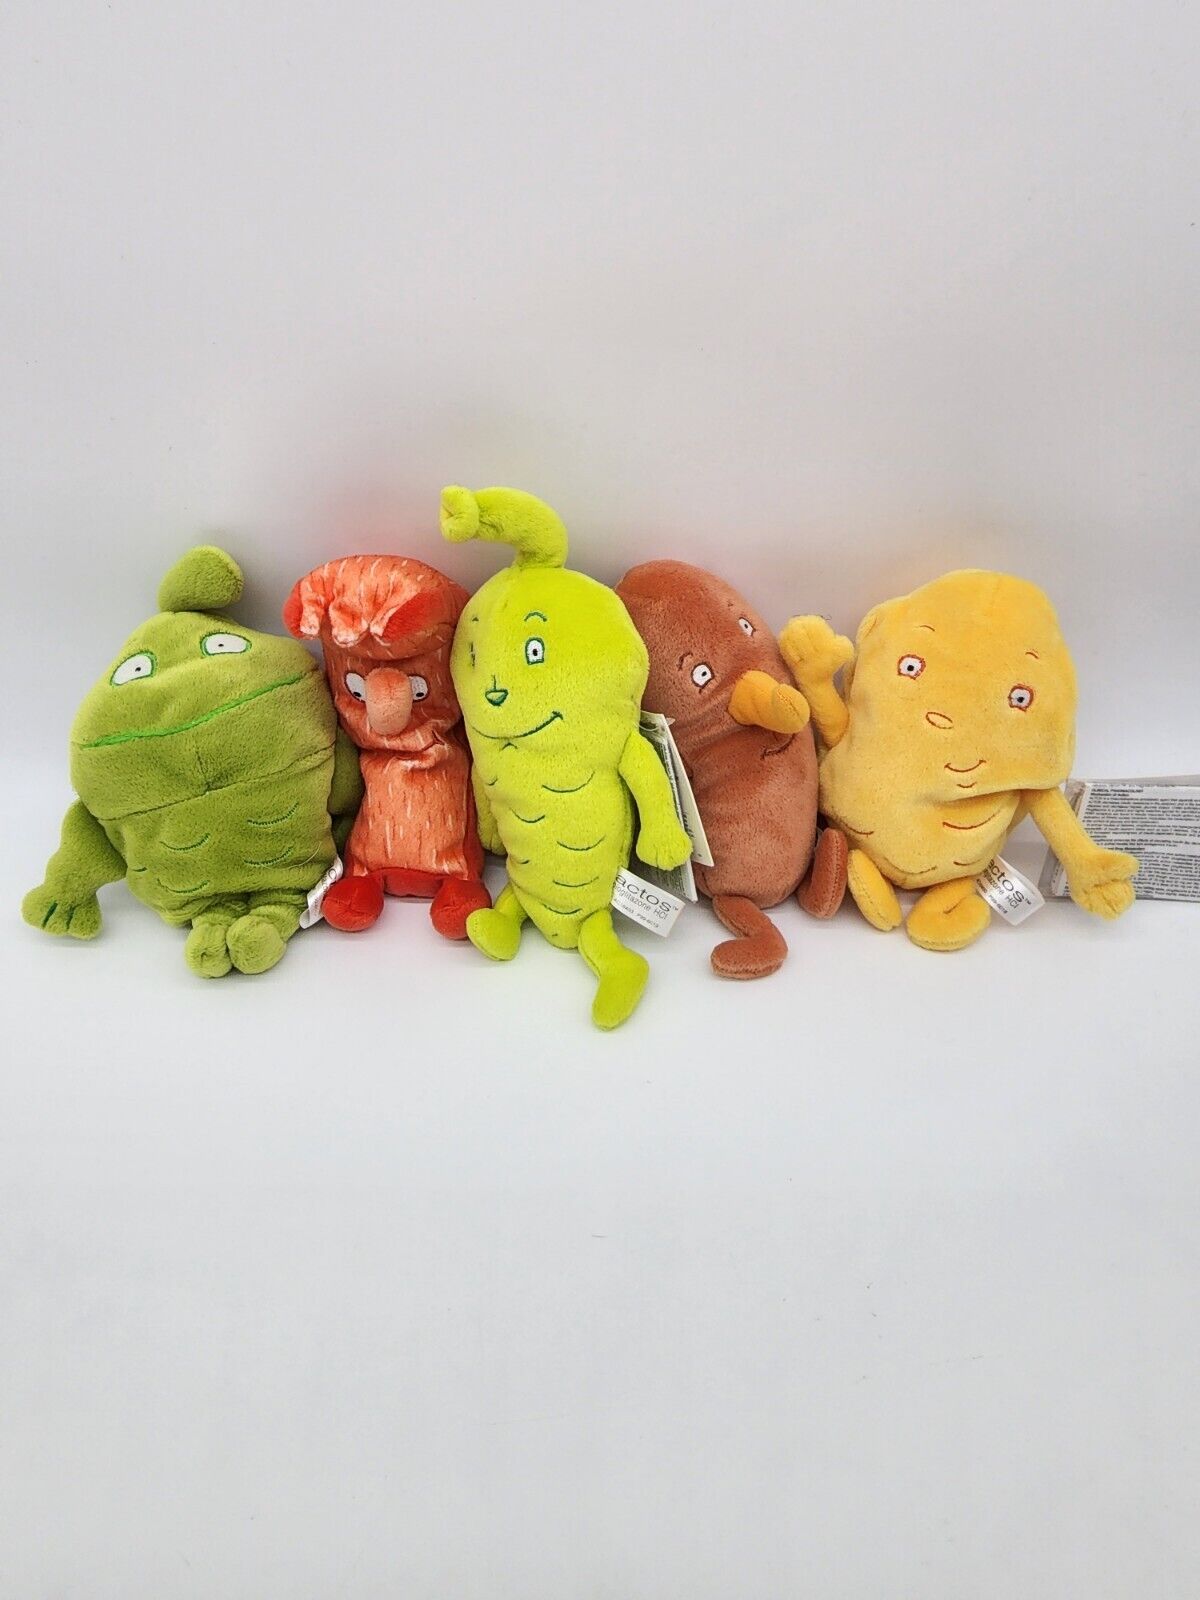 Actos Promotional Plush Body Organ Set of 5 Clean Muscle Kidney Liver etc.